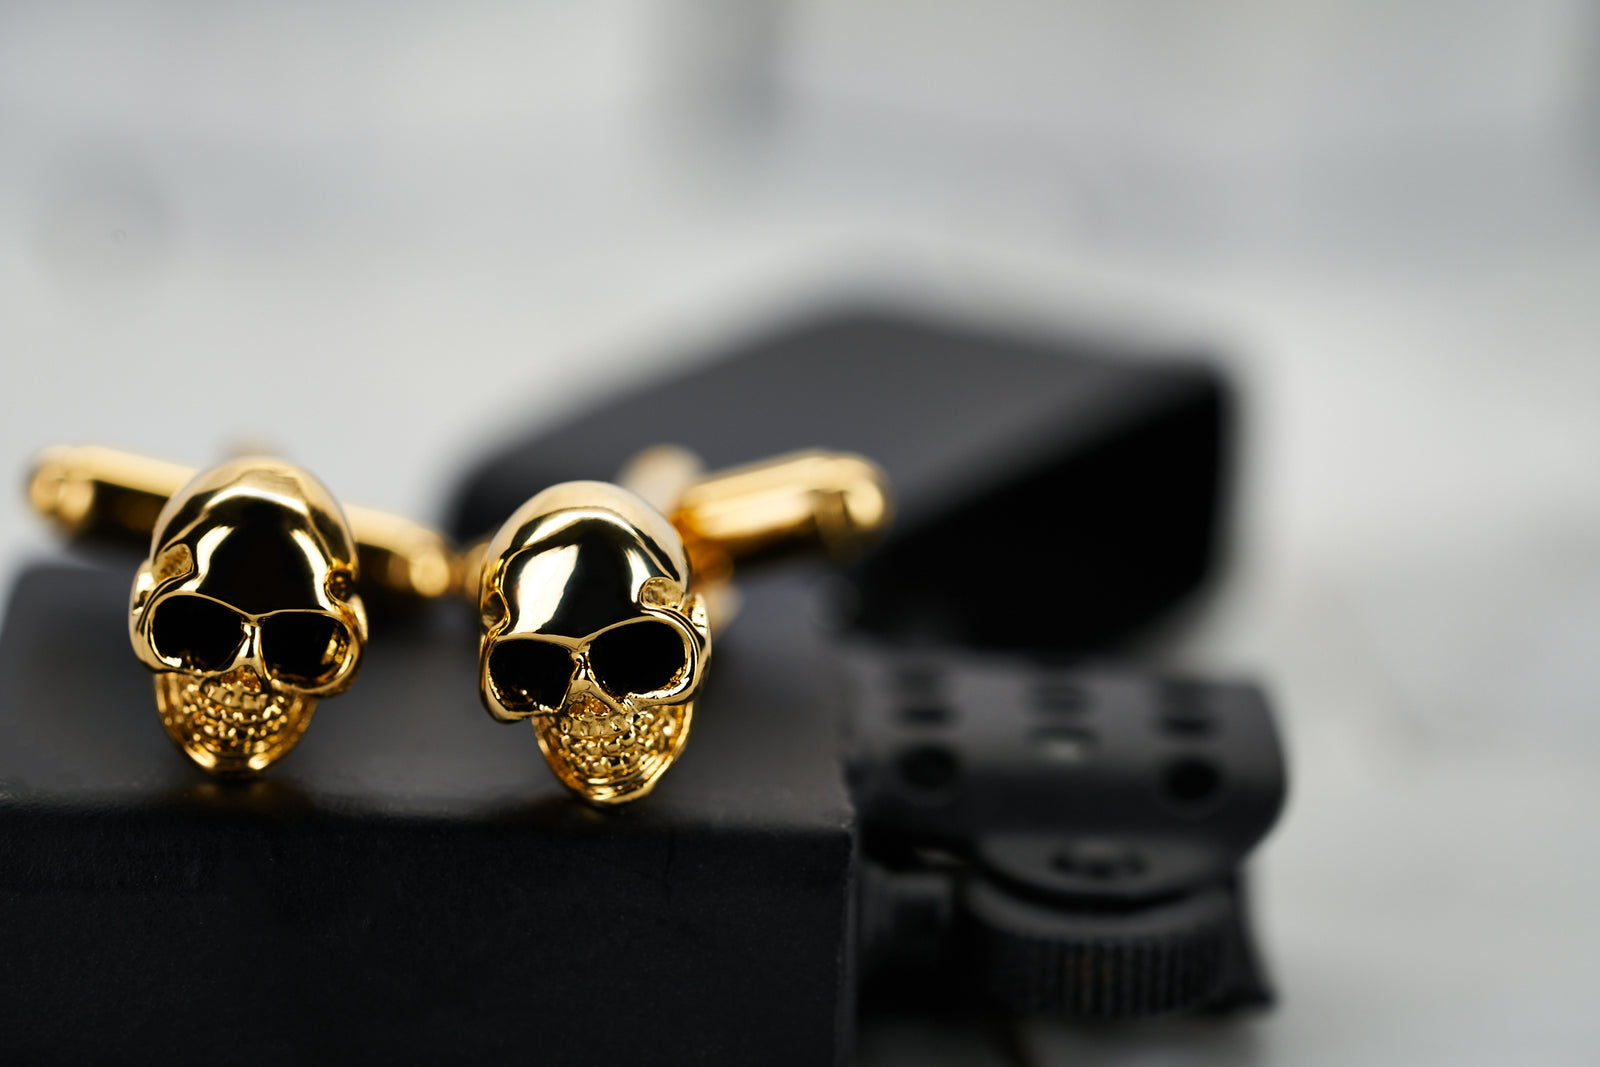 A front view image the gold plated skull men's cufflinks made by Dear Martian, Brooklyn.